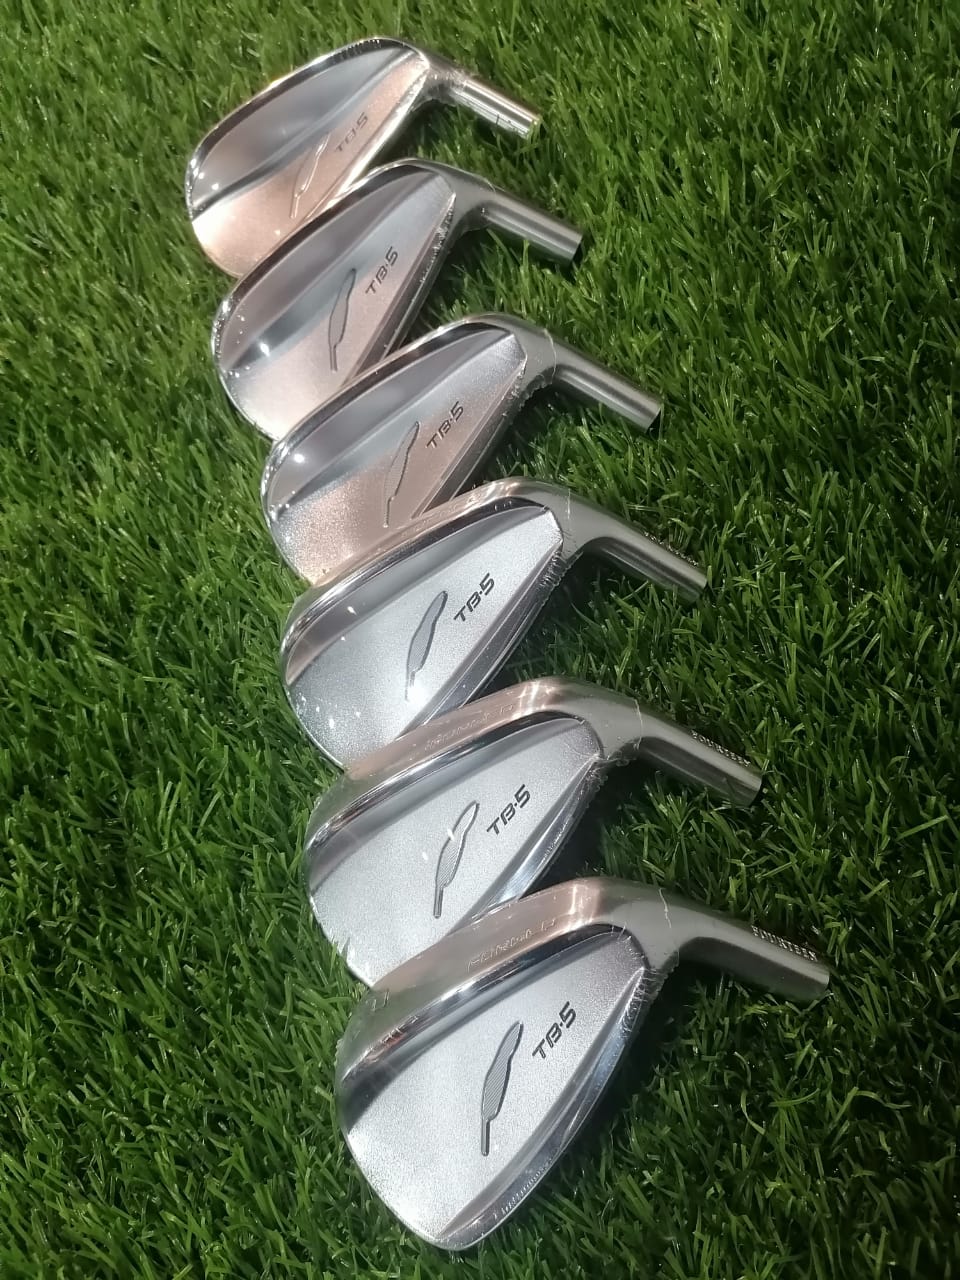 FOURTEEN TB-5 FORGED IRON (HEAD ONLY - 6PCS)